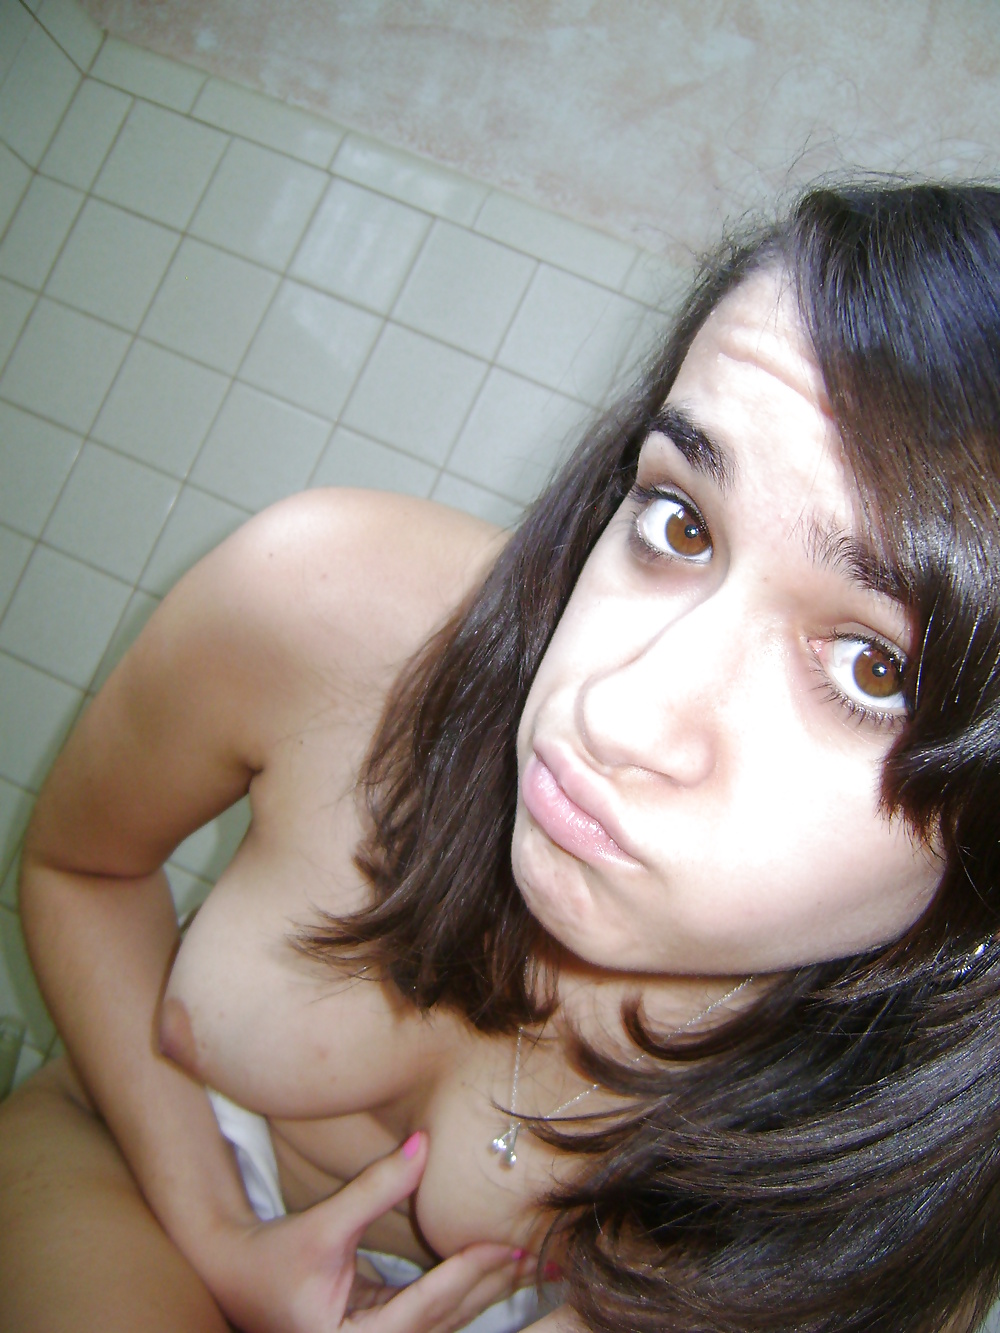 Piccole troie teenager sexy
 #31770497